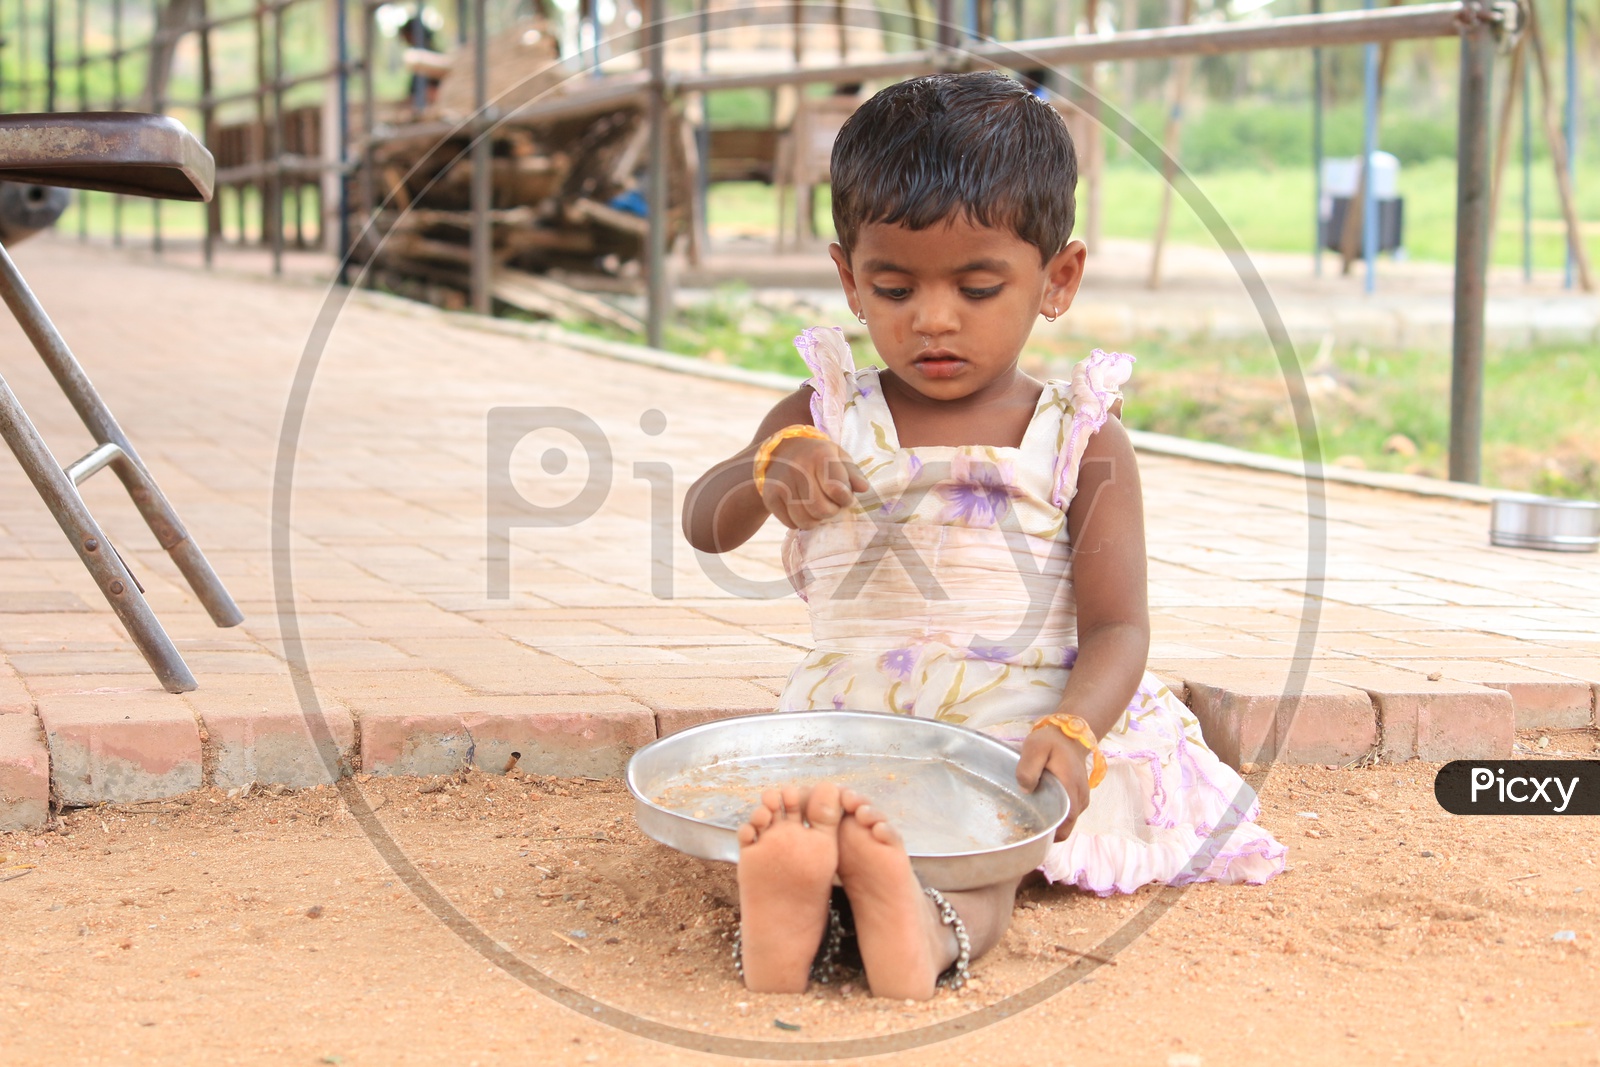 Little Girl playing with sand